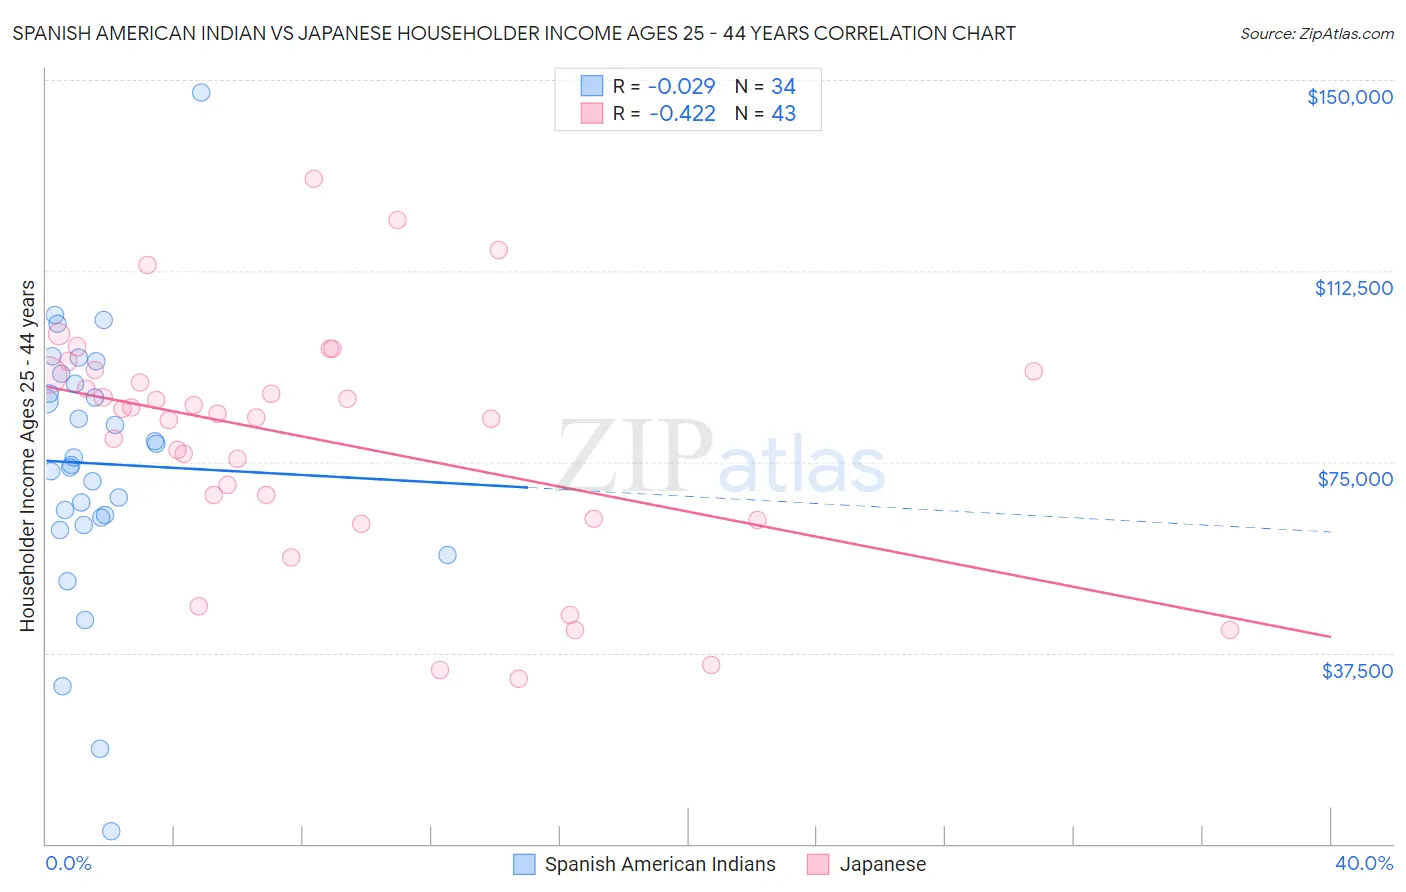 Spanish American Indian vs Japanese Householder Income Ages 25 - 44 years